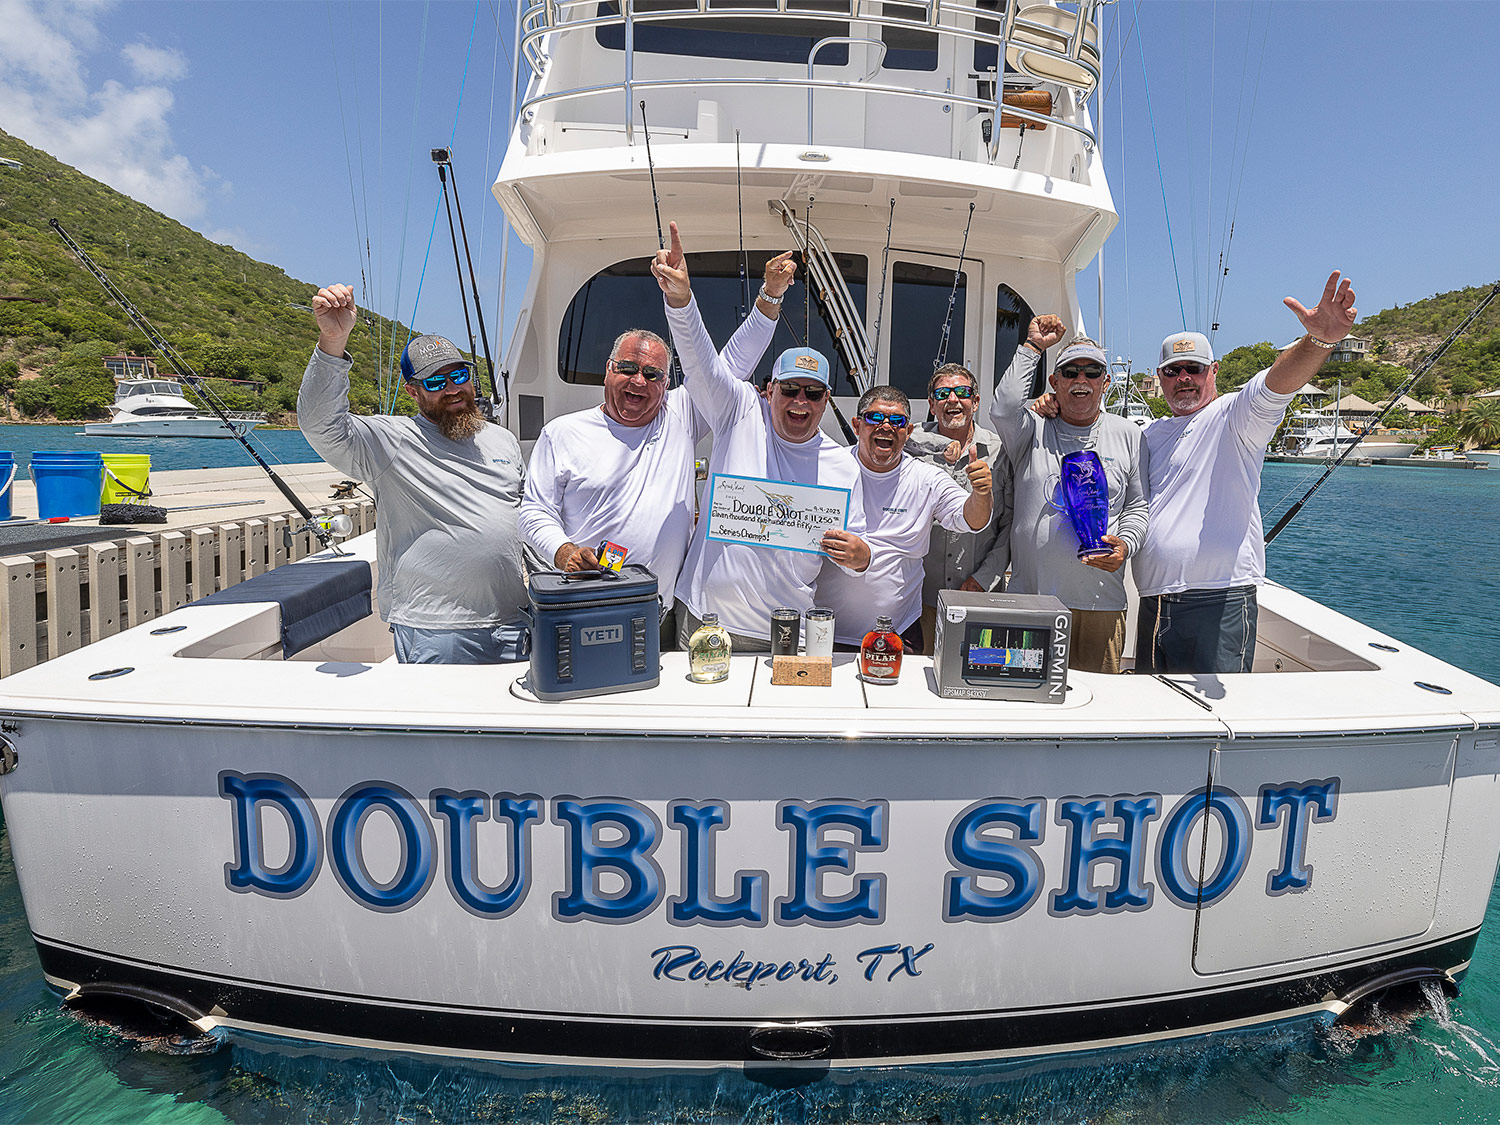 Team Double Shot celebrating a win in the cockpit of their sport-fishing boat.